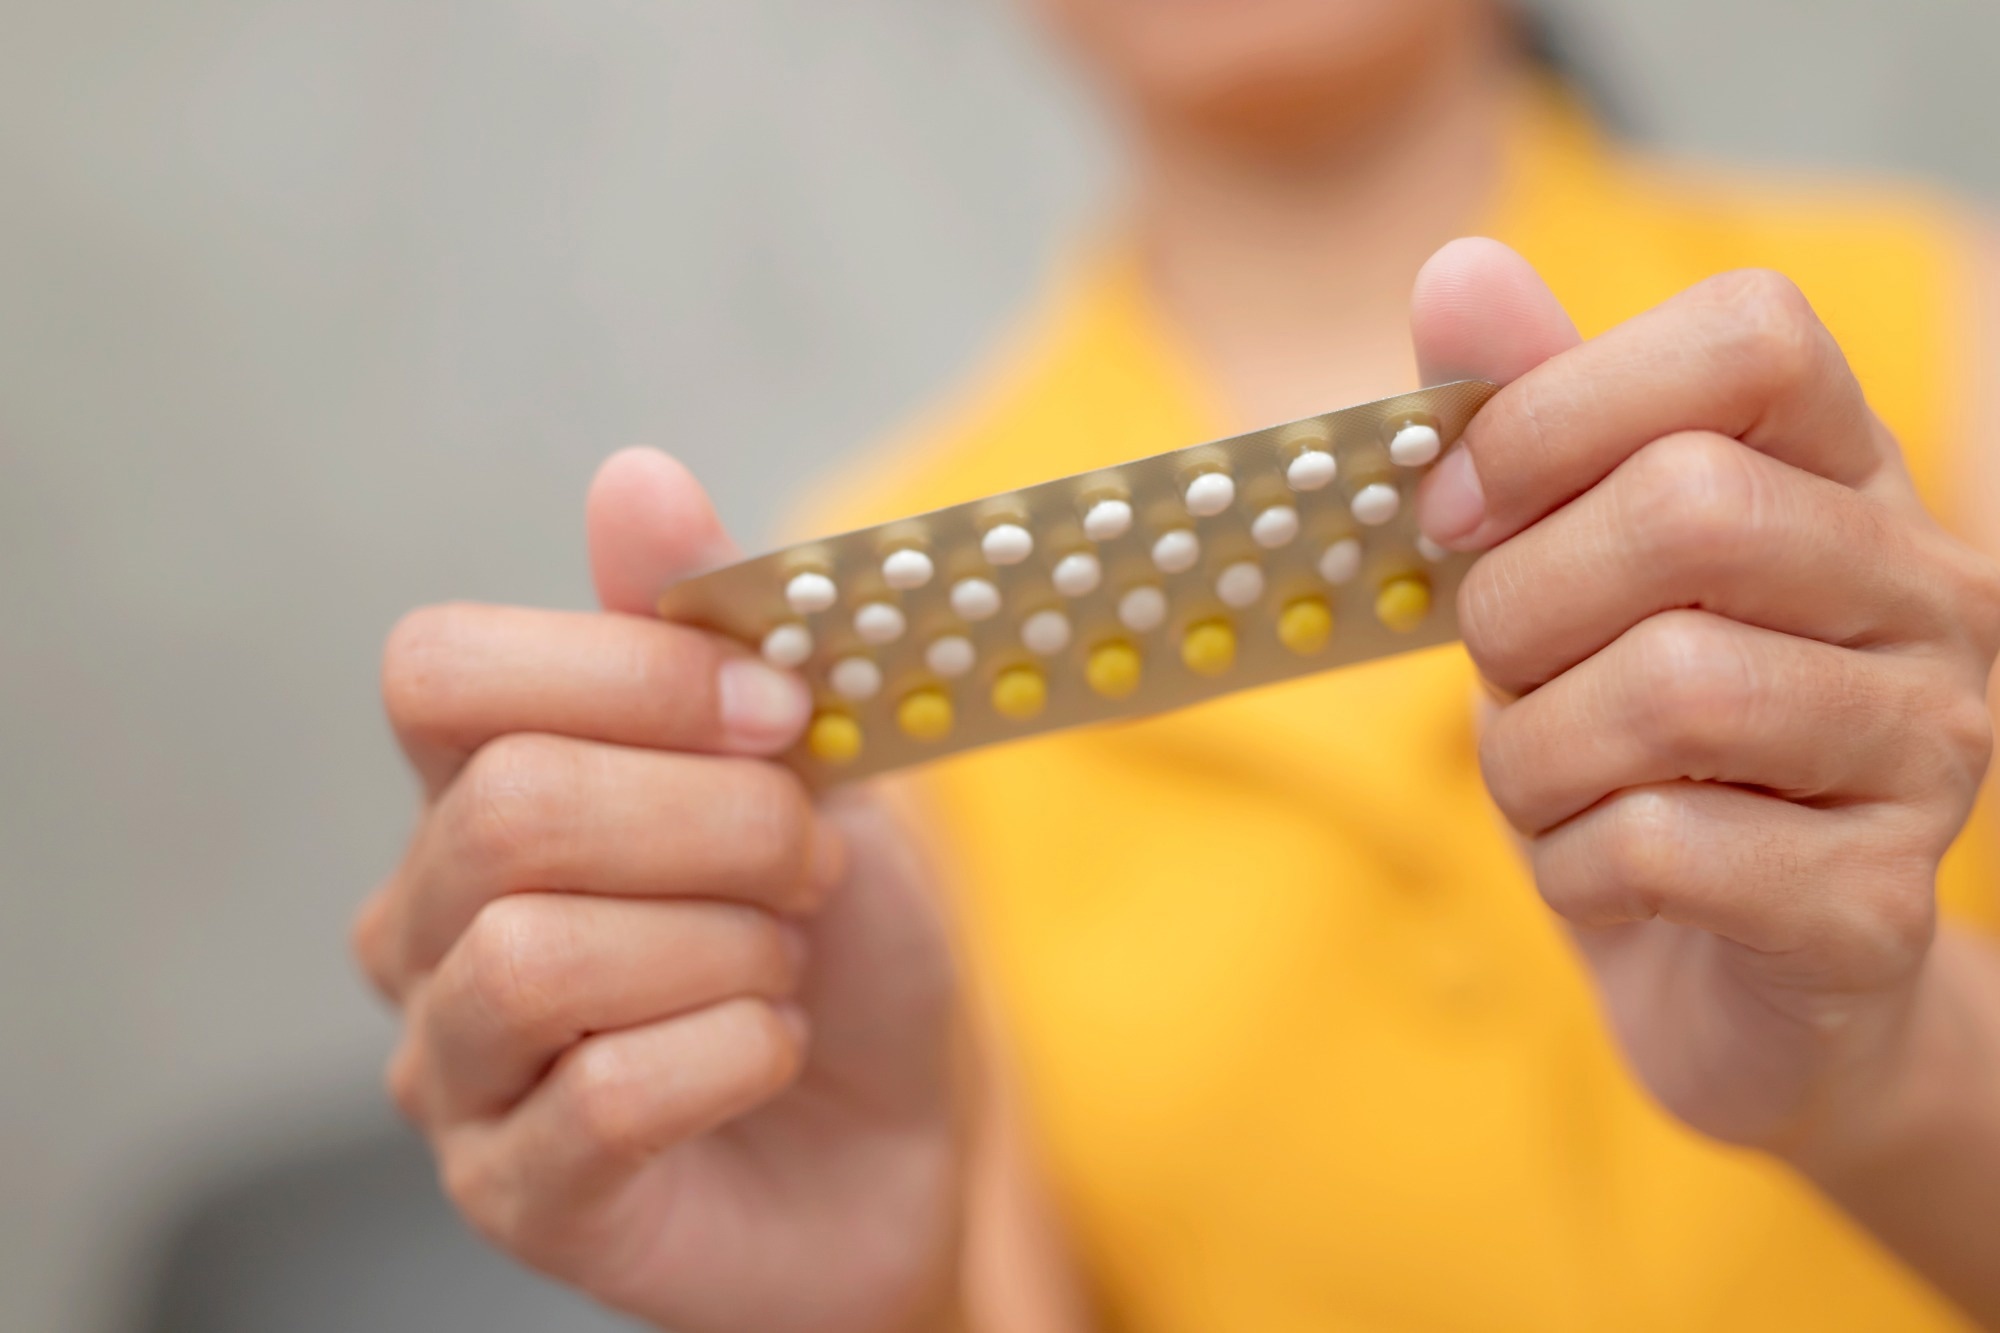 Study: Combined and progestagen-only hormonal contraceptives and breast cancer risk: A UK nested case–control study and meta-analysis. ​​​​​​​Image Credit: PATCHARIN SIMALHEK / Shutterstock